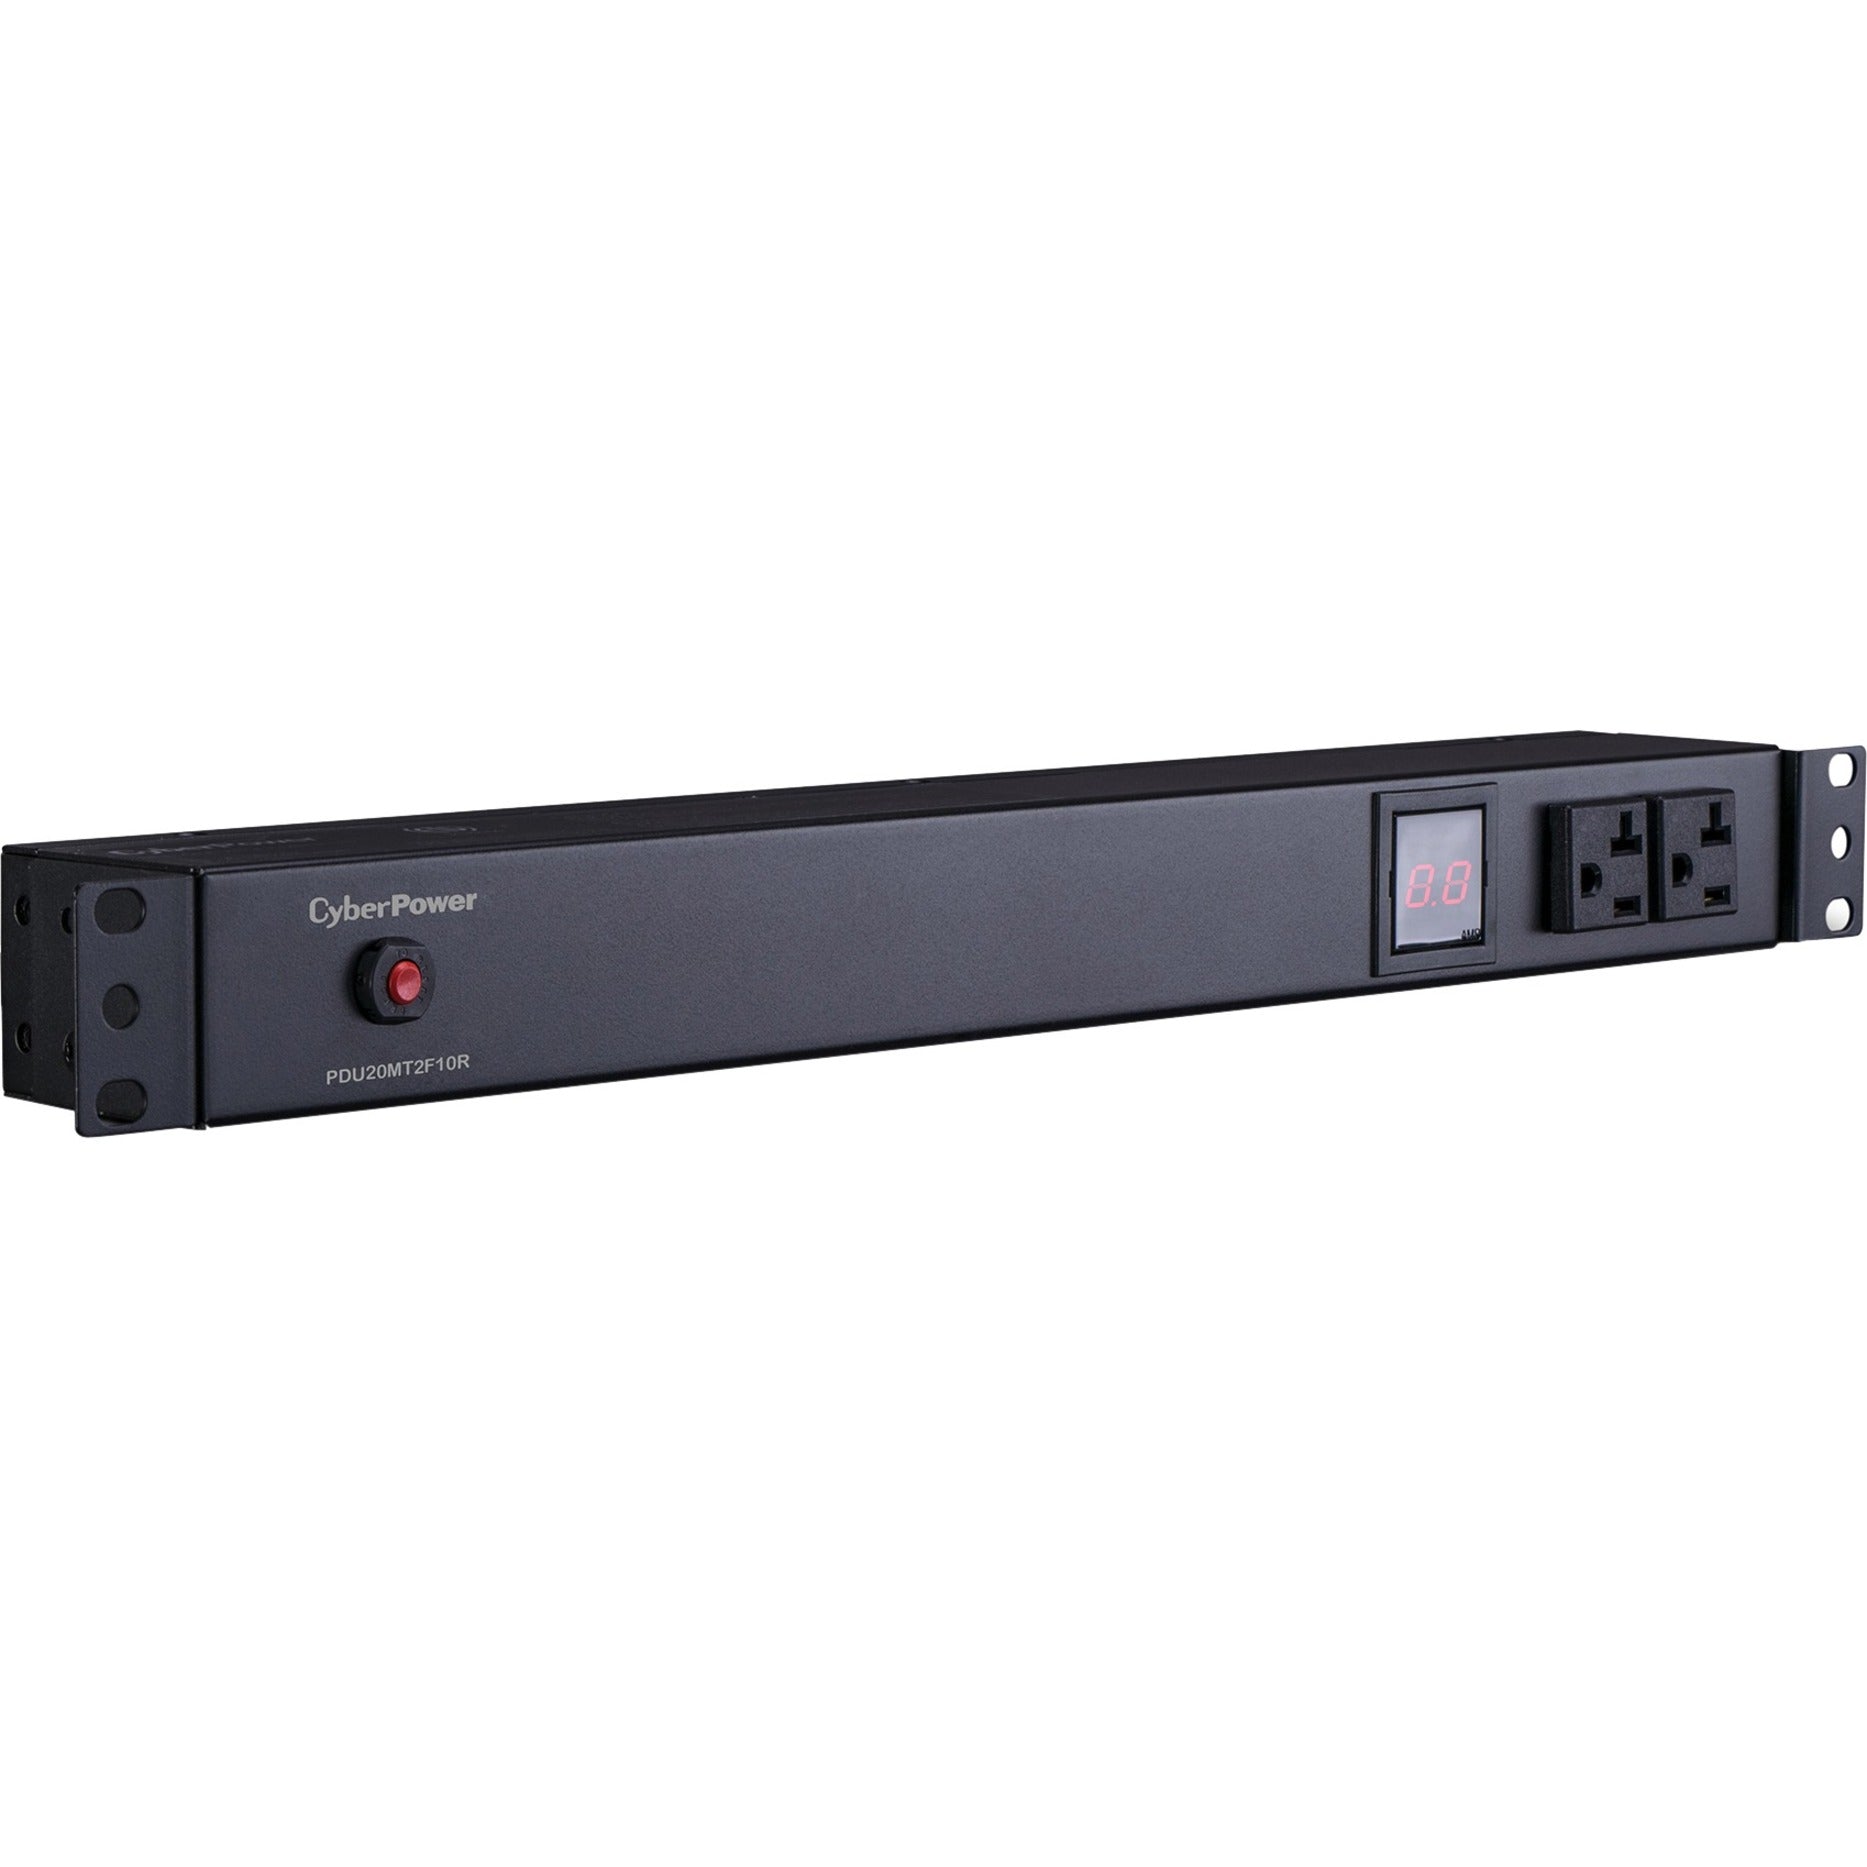 CyberPower PDU20MT2F10R Metered PDU 12-Outlets 20A 120V AC Rack-mountable CyberPower PDU20MT2F10R PDU mesuré 12 prises 20A 120V AC Montable en rack